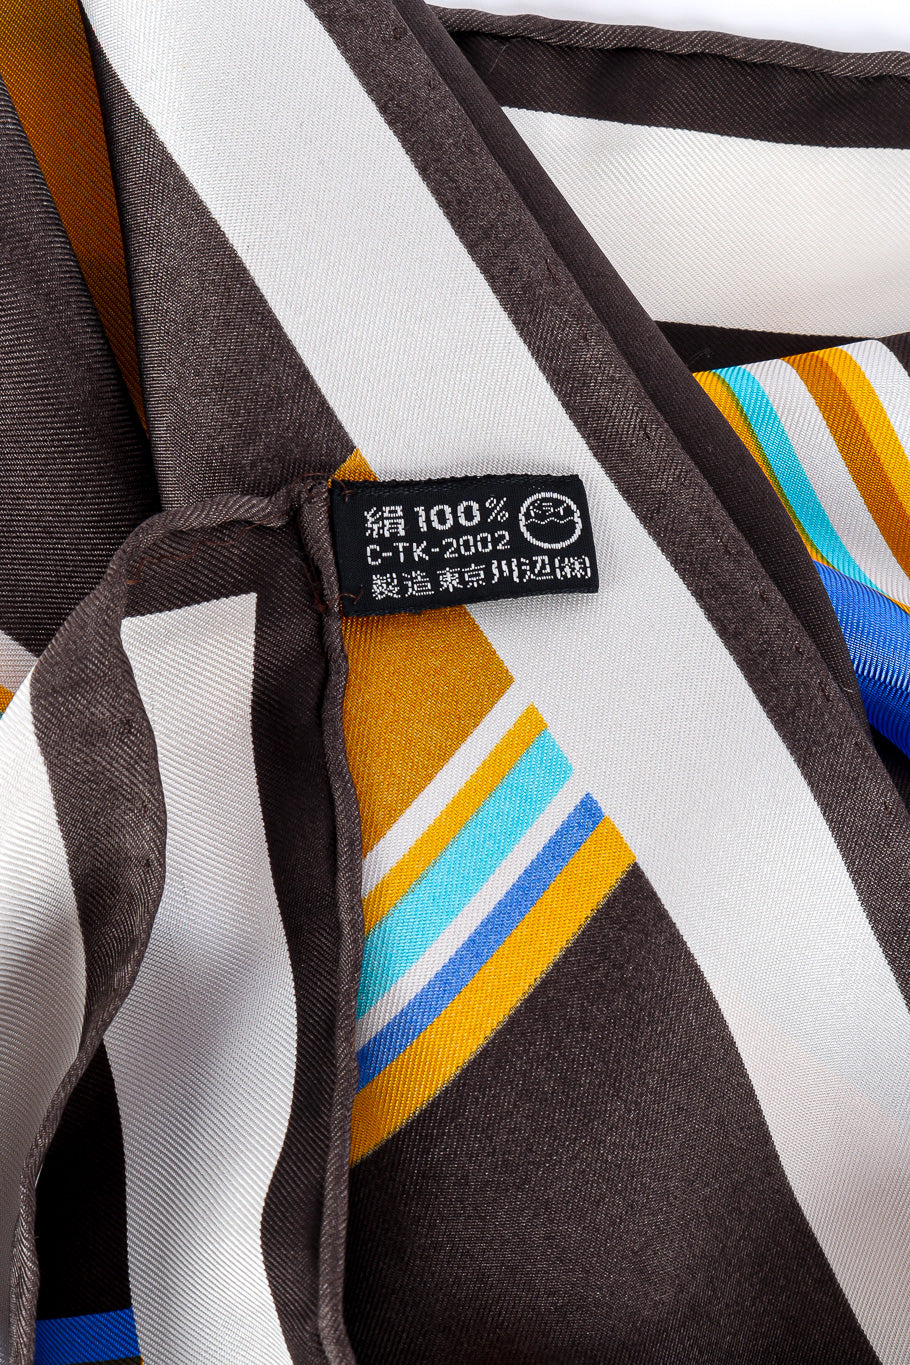 Striped Silk Scarf by Yves Saint Laurent Photo of Fabric Content Label @recessla